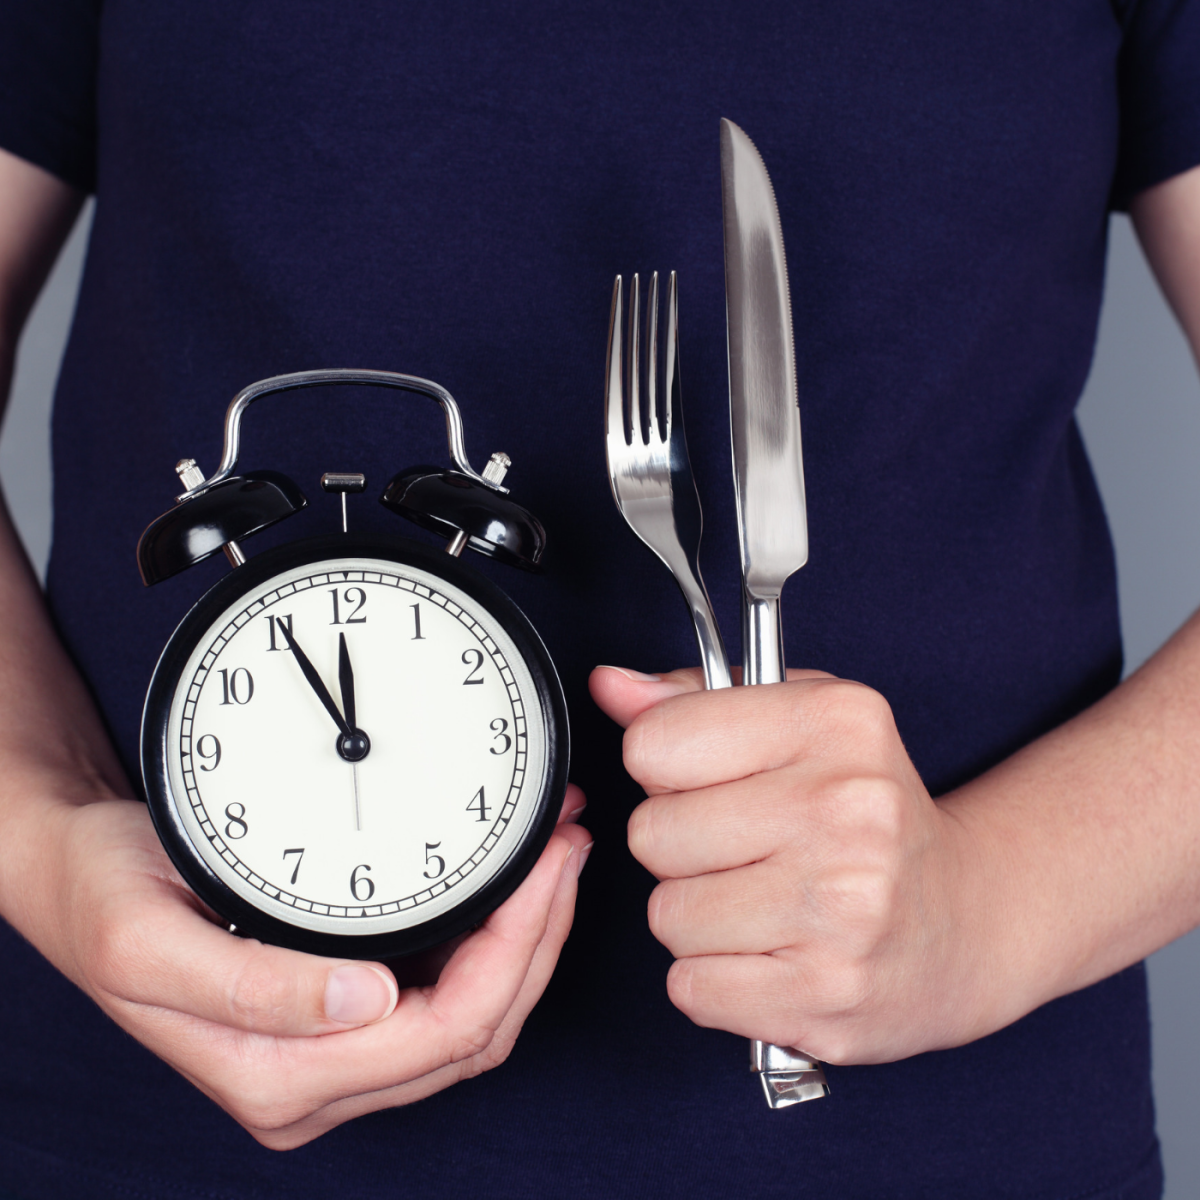 Health Benefits of Time Restricted Eating